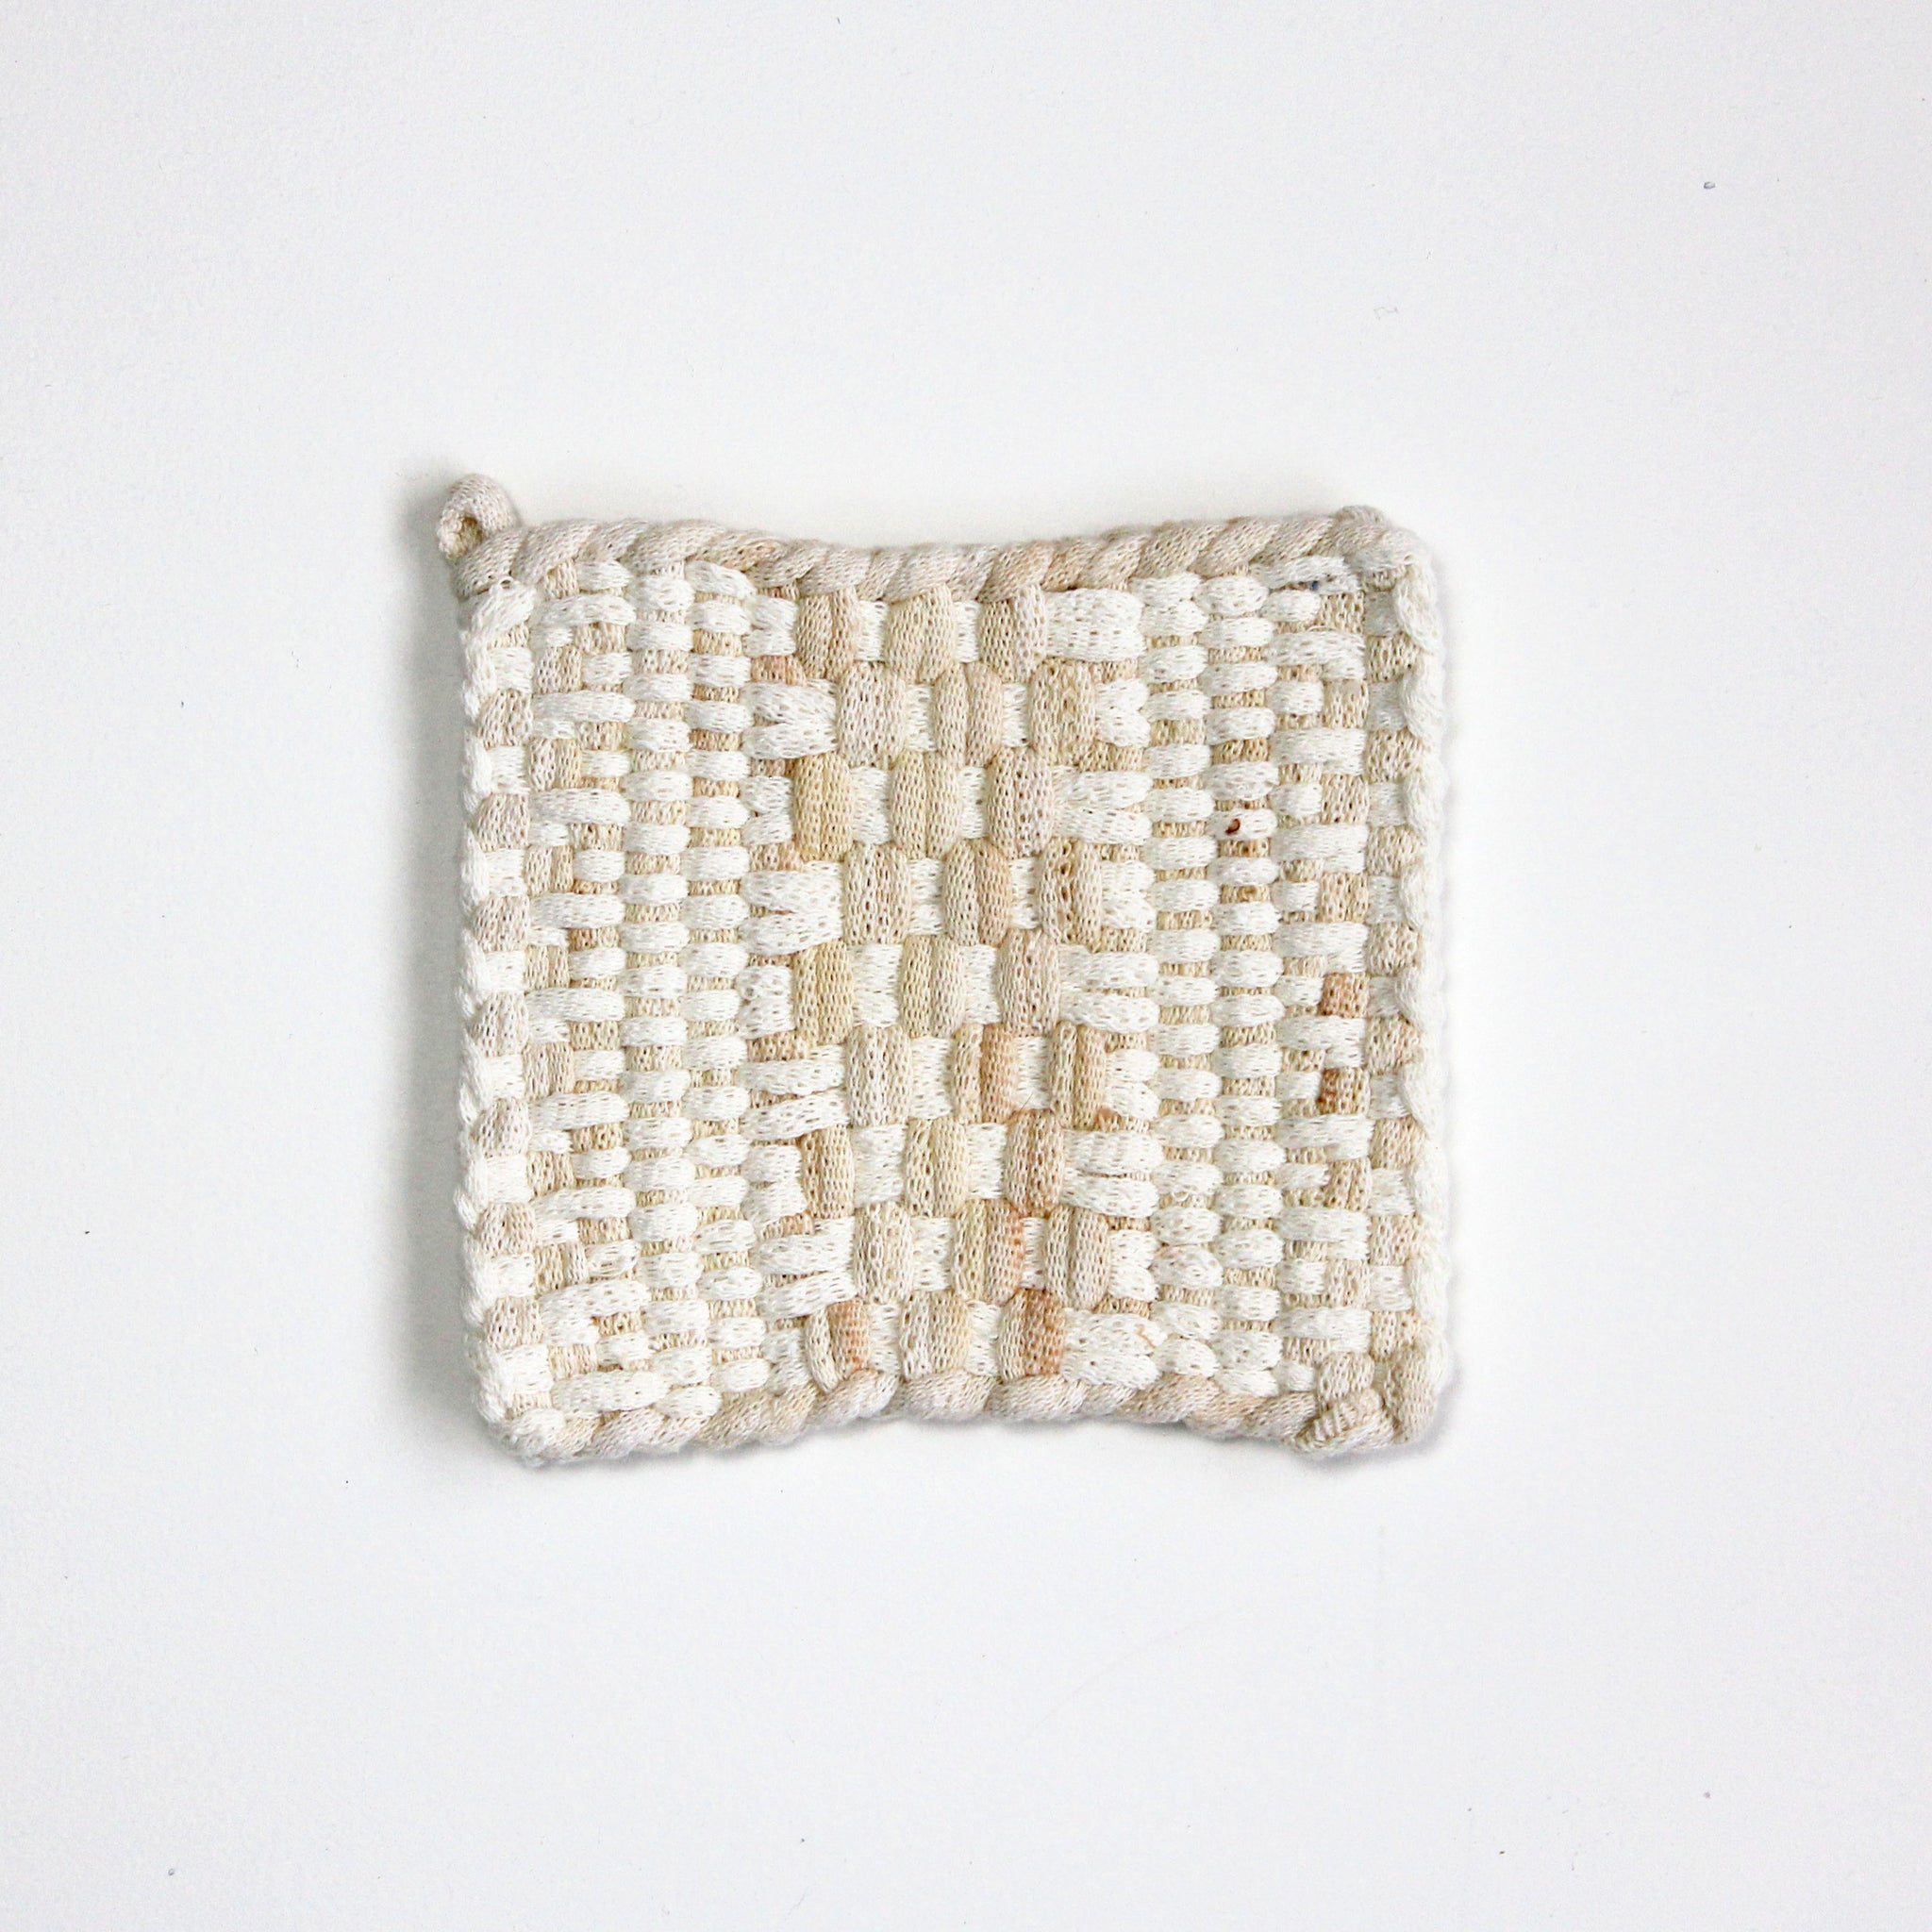 Handwoven Pot Holder - One of a Kind 1